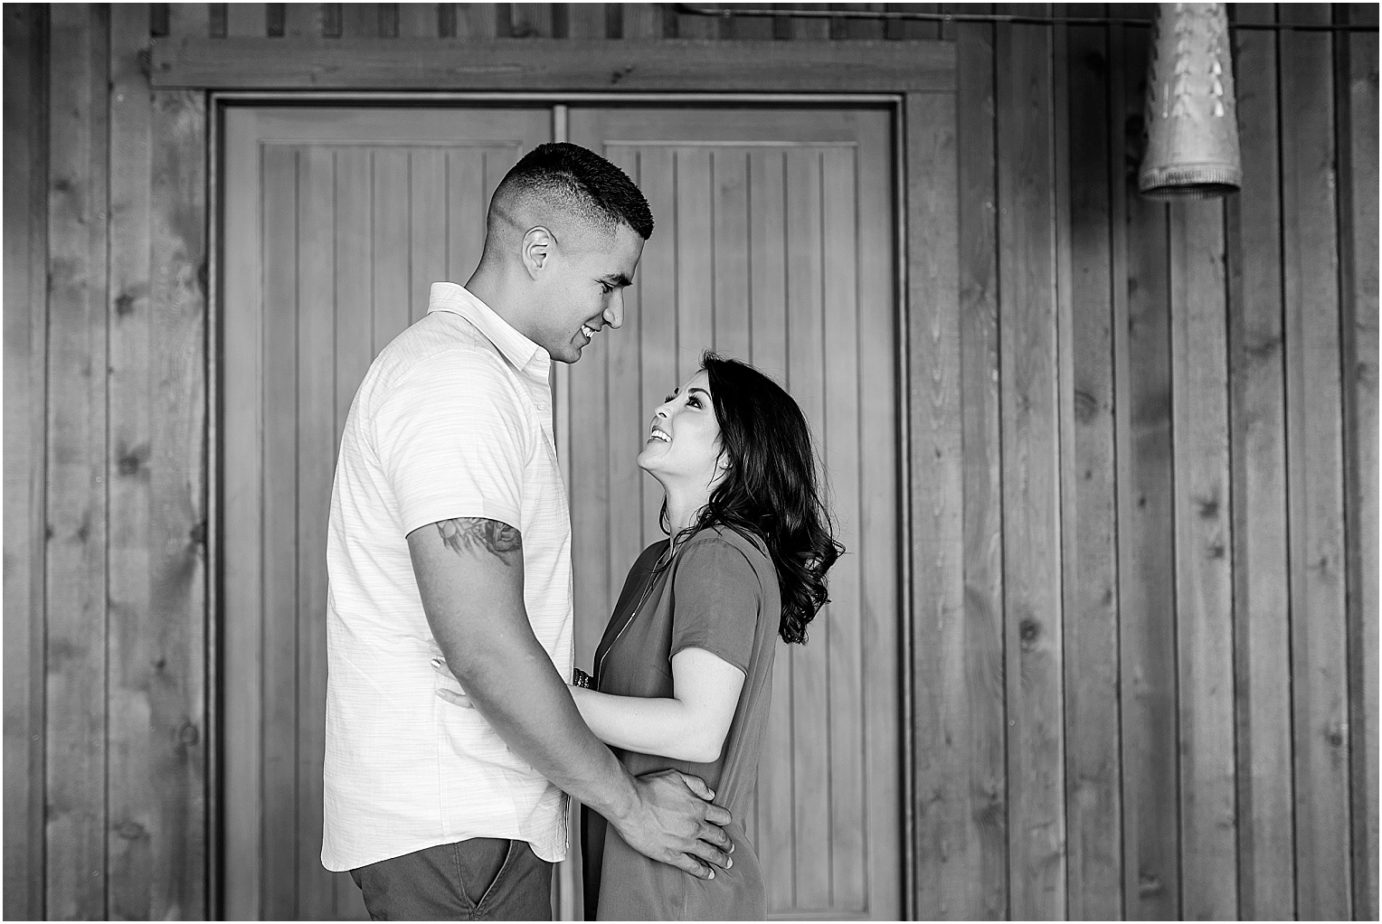 Hacket Ranch Engagement Session Yakima Photographer Jorge and Robin by the hanger